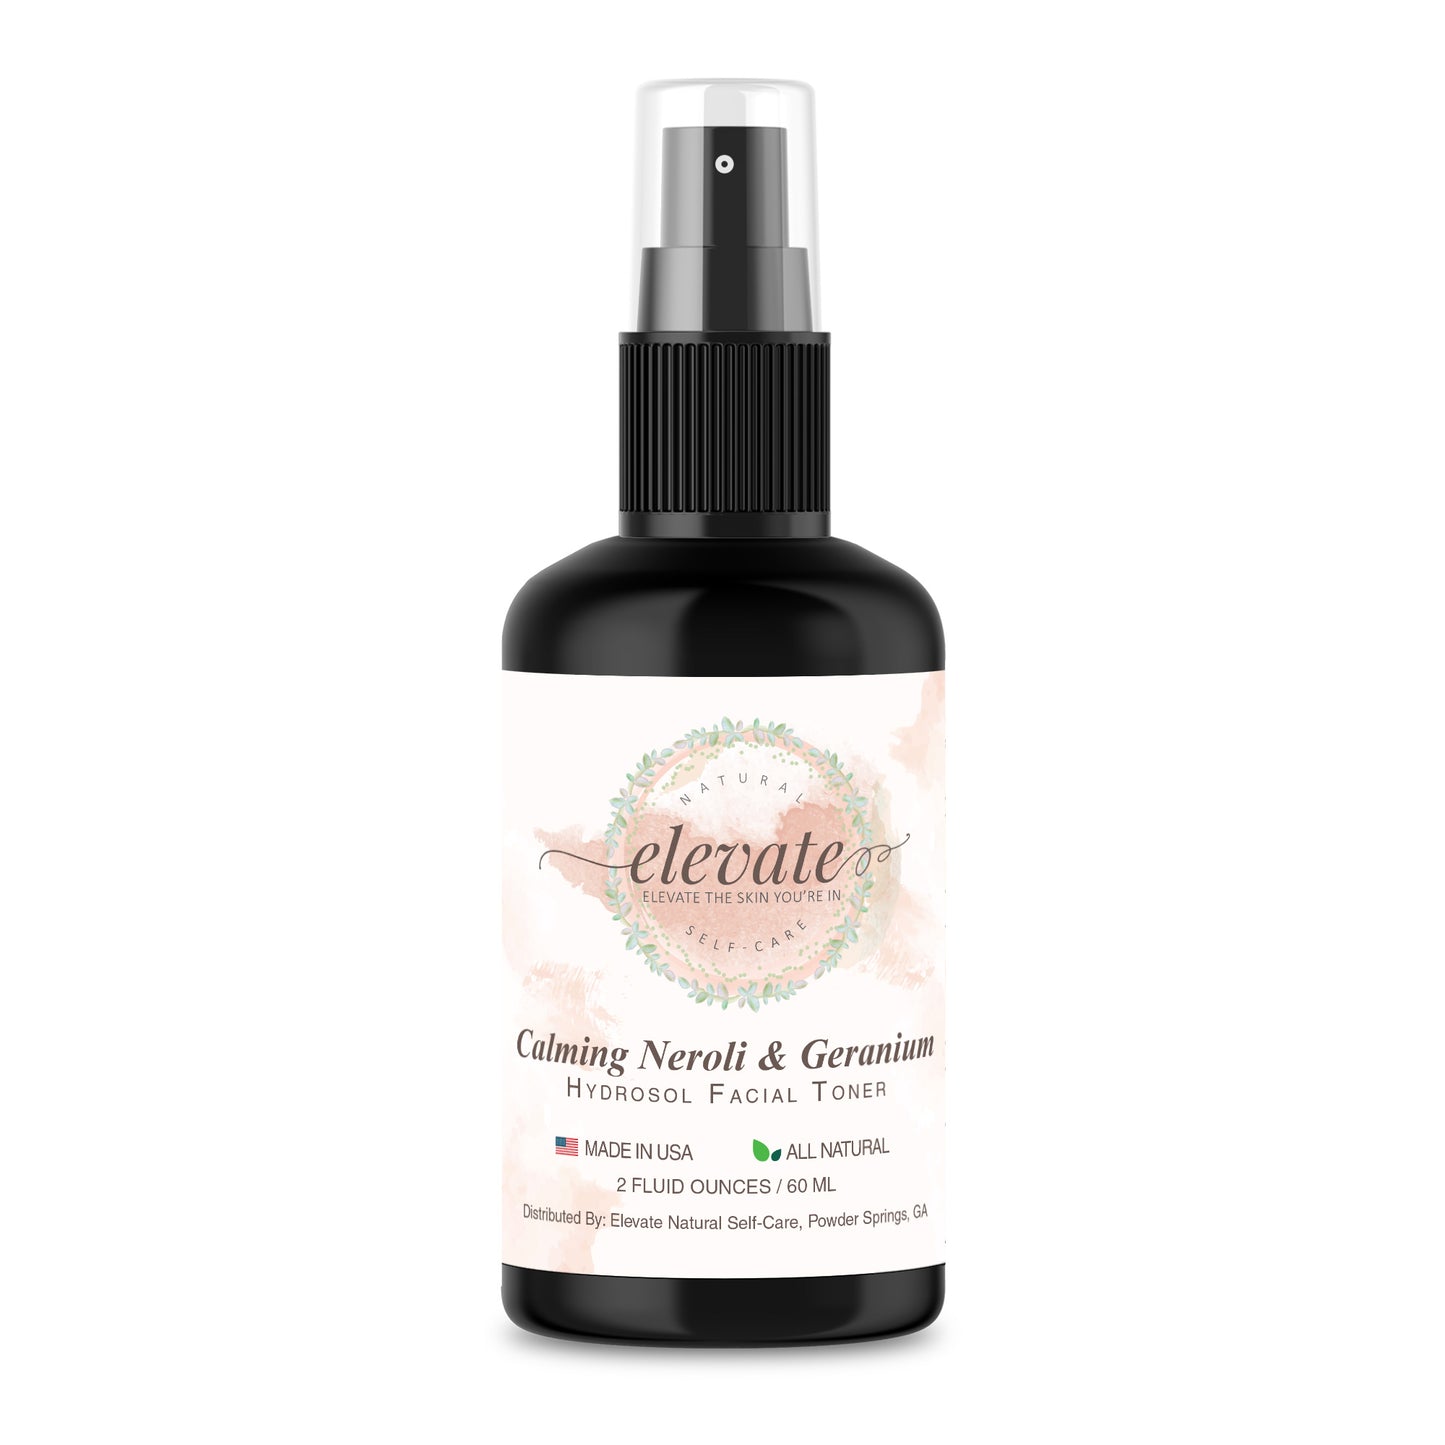 Calming Neroli and Geranium Hydrosol Facial Toner Spray is a spray-on facial toner handcrafted with pure botanical extracts that contain vitamins and minerals made to help nourish and condition your skin with rich proteins while leaving skin feeling toned and moisturized without heavy oils.